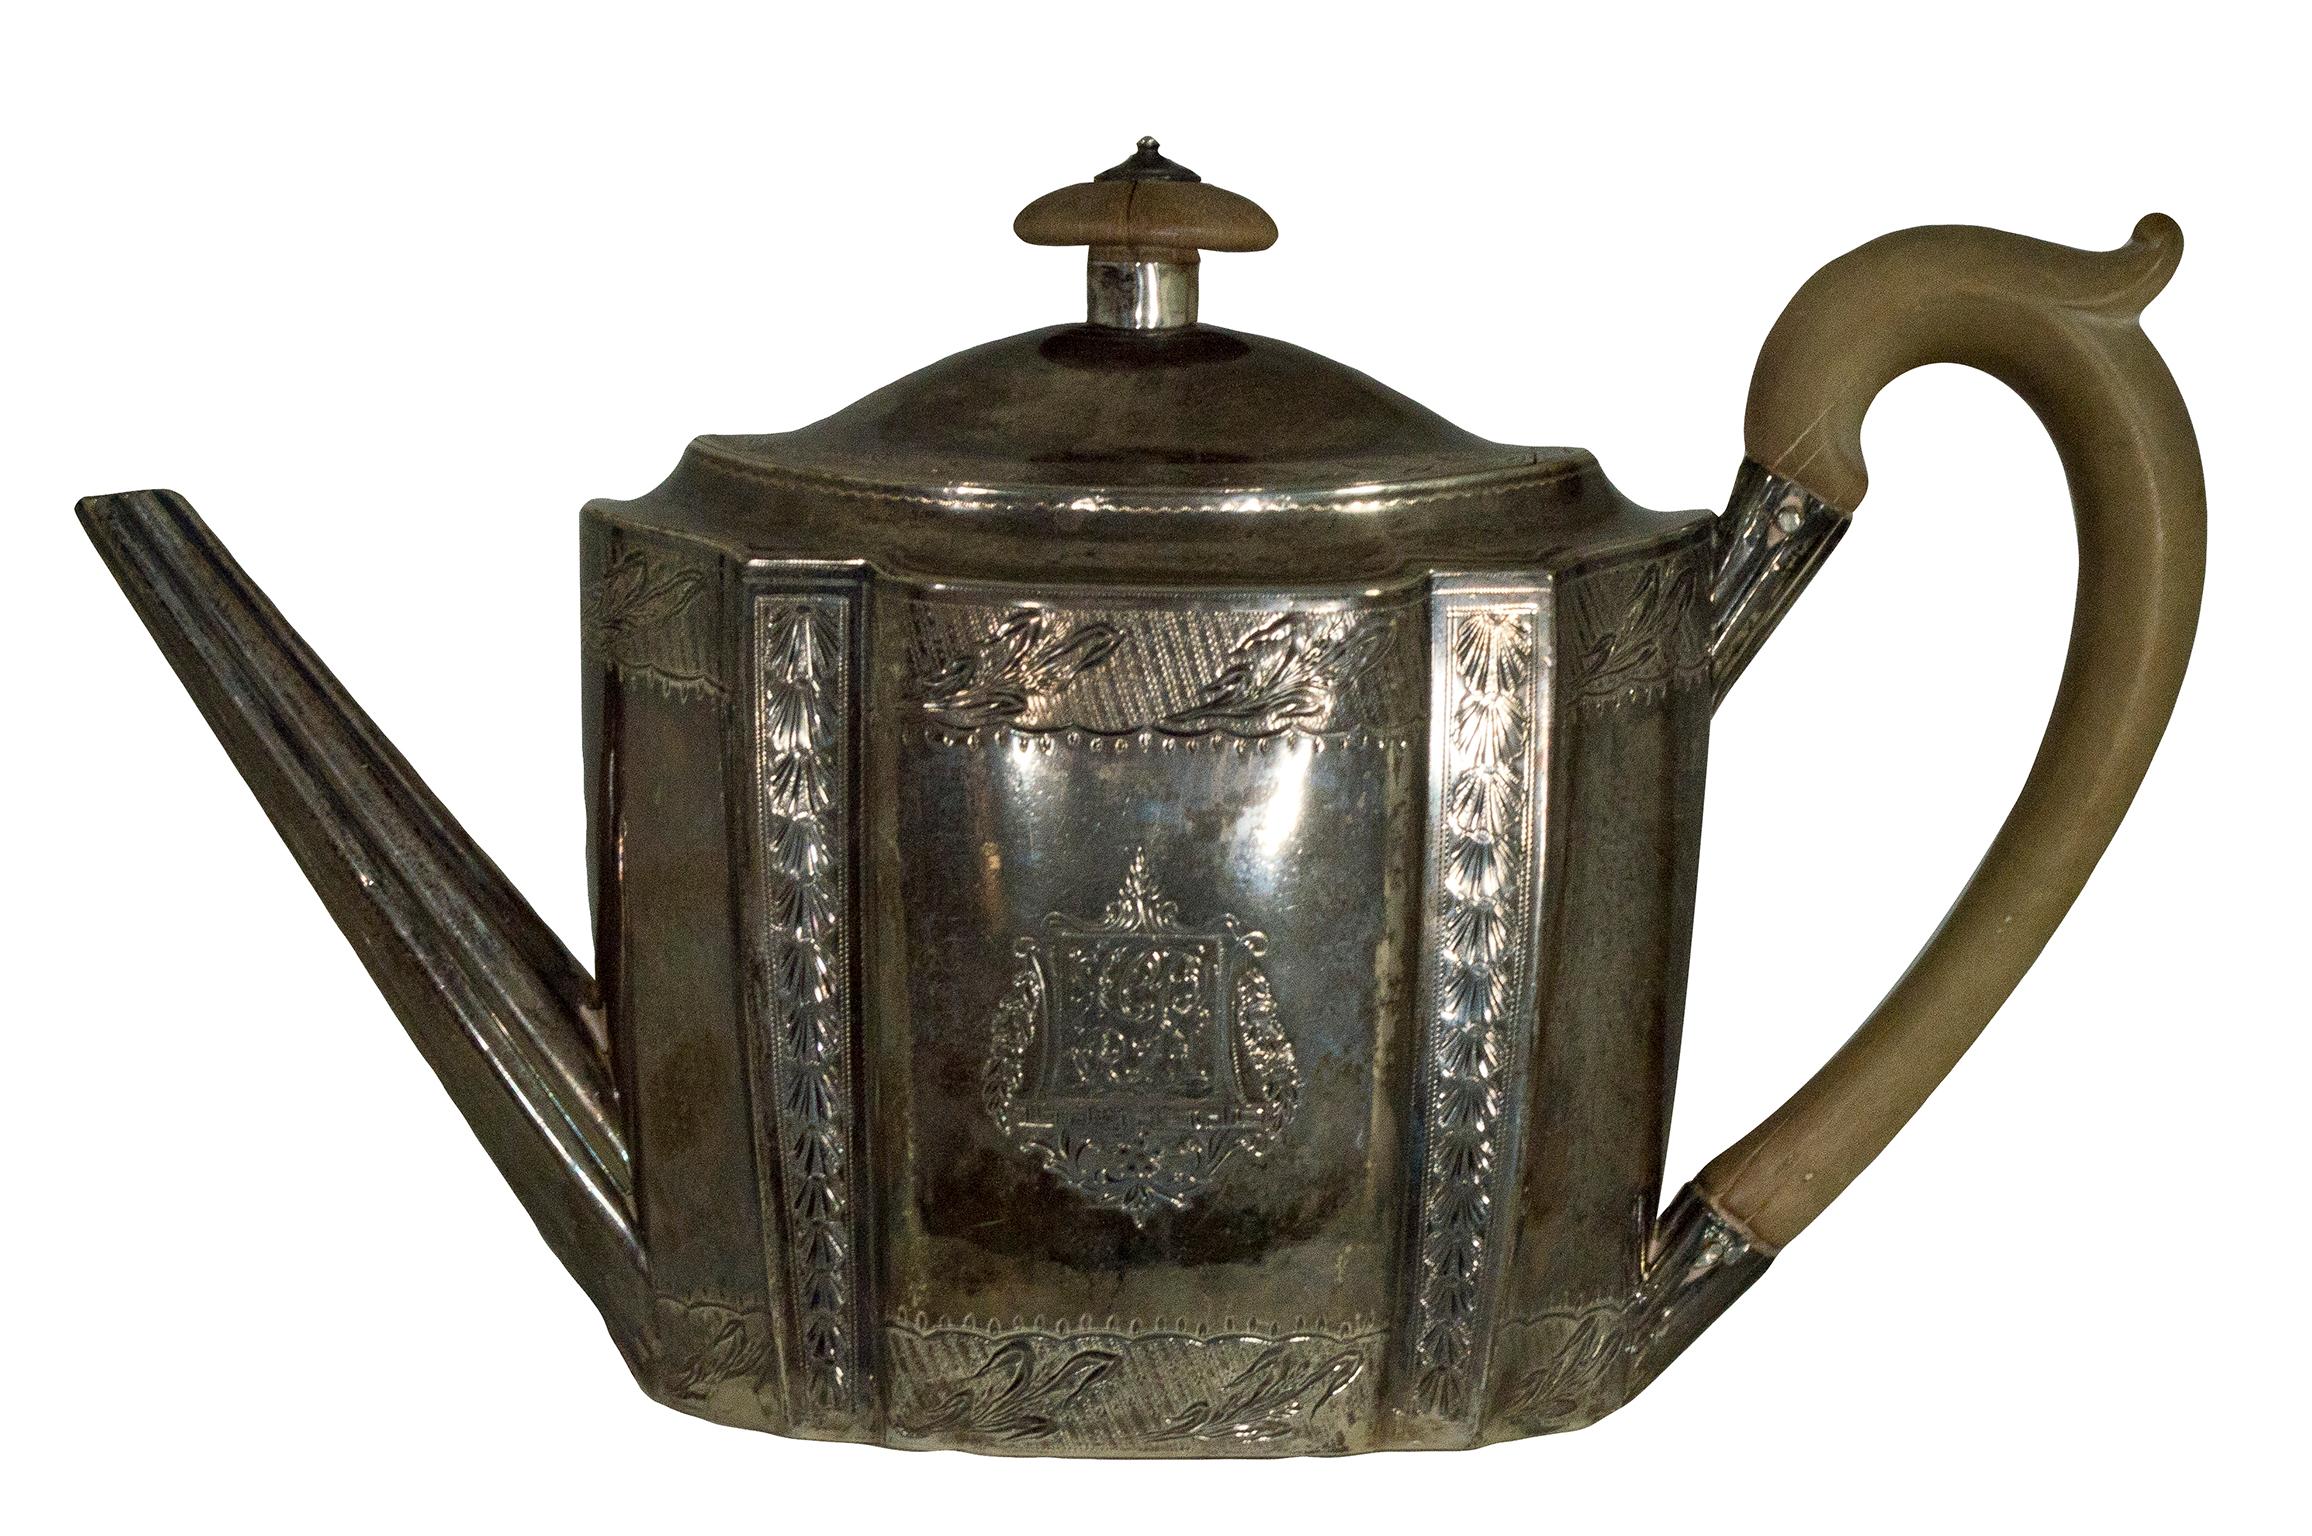 "Teapot, " Leopard's Head, London during the reign King George III, by John Emes